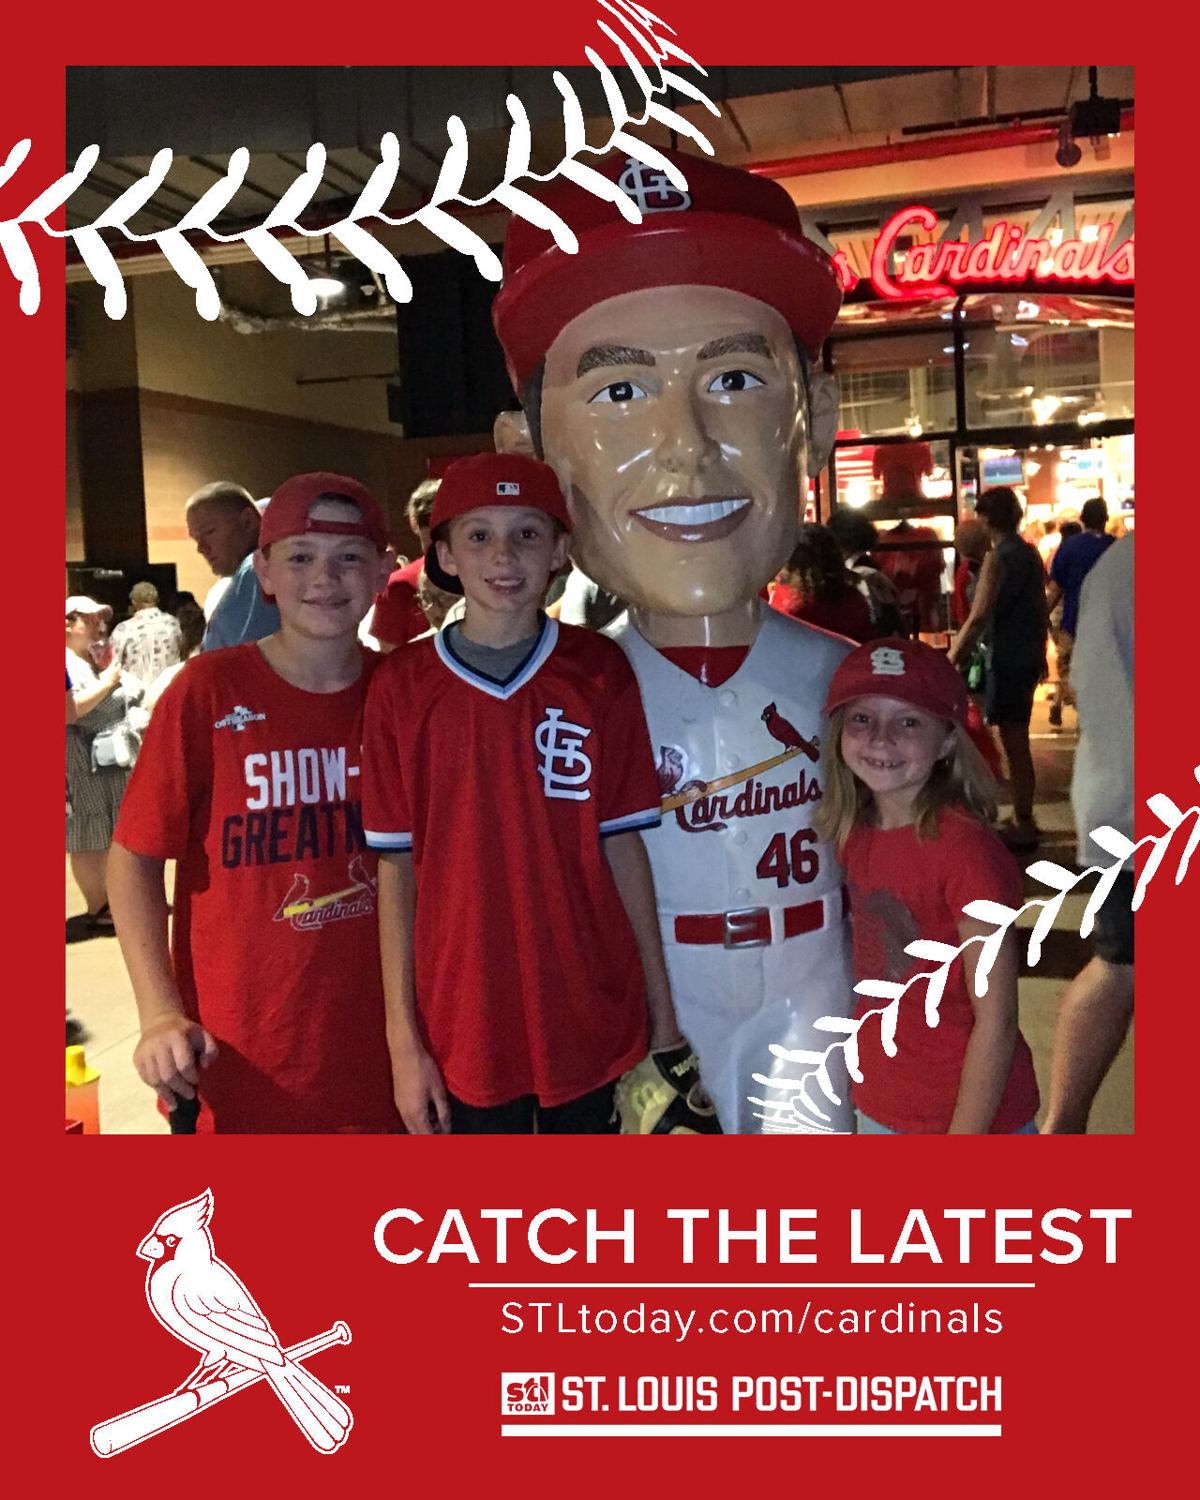 See who turned out at the St. Louis Cardinals vs. Chicago Cubs game